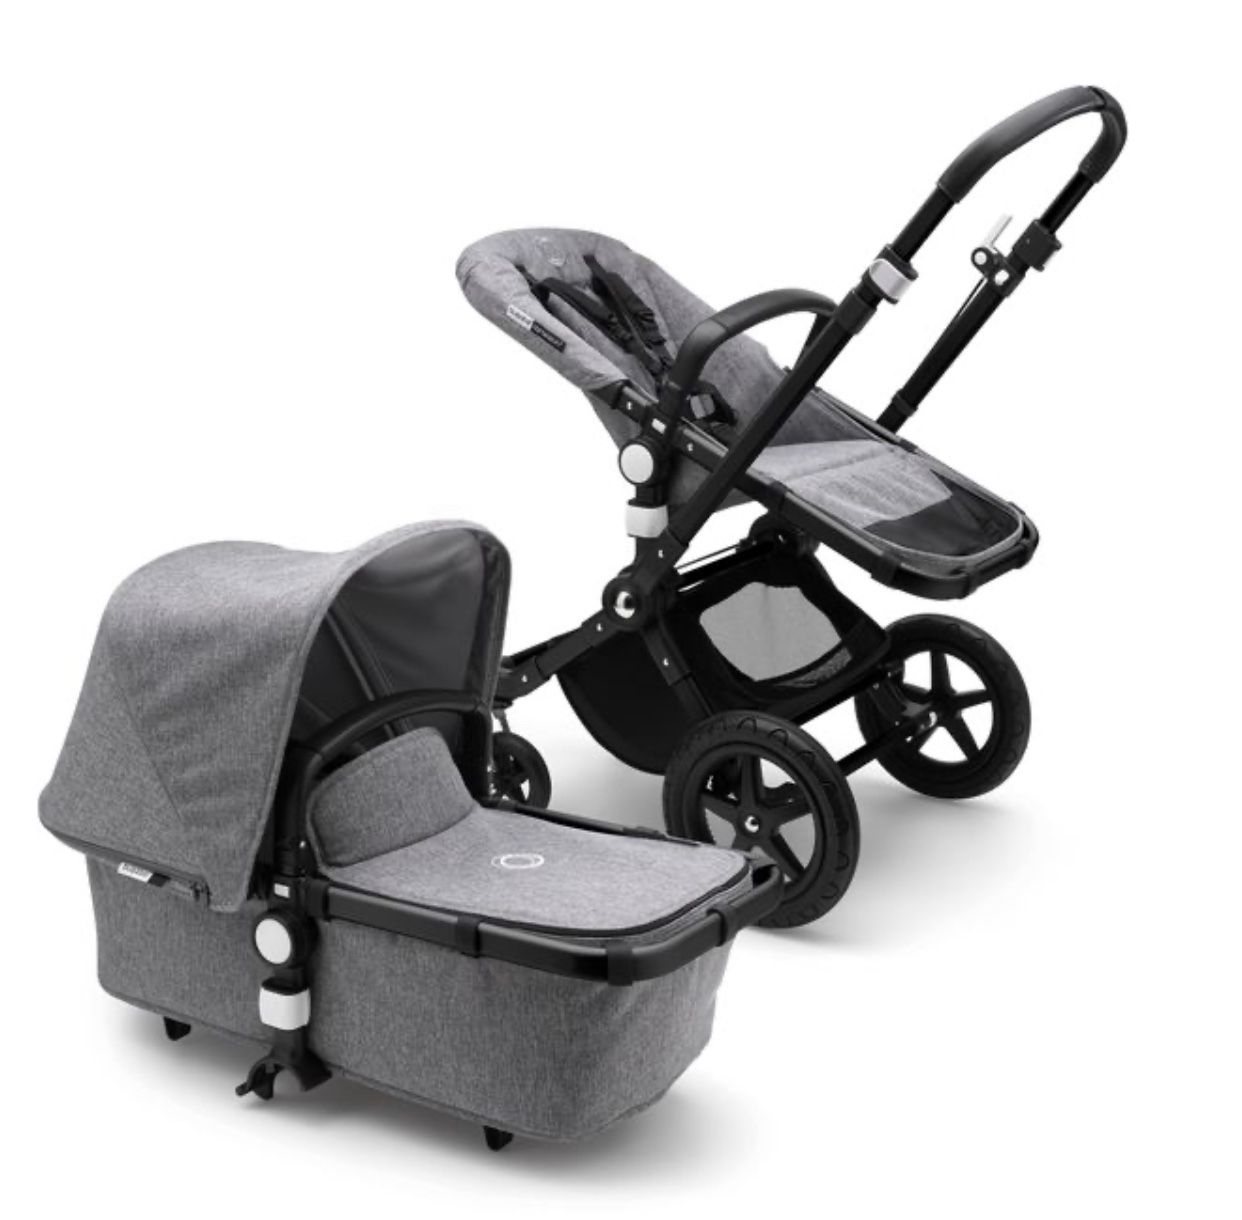 Bugaboo chameleon 3 ,scooter, car seat and SCOOTER adapters, also have NUNA PIPA car seat adapter!